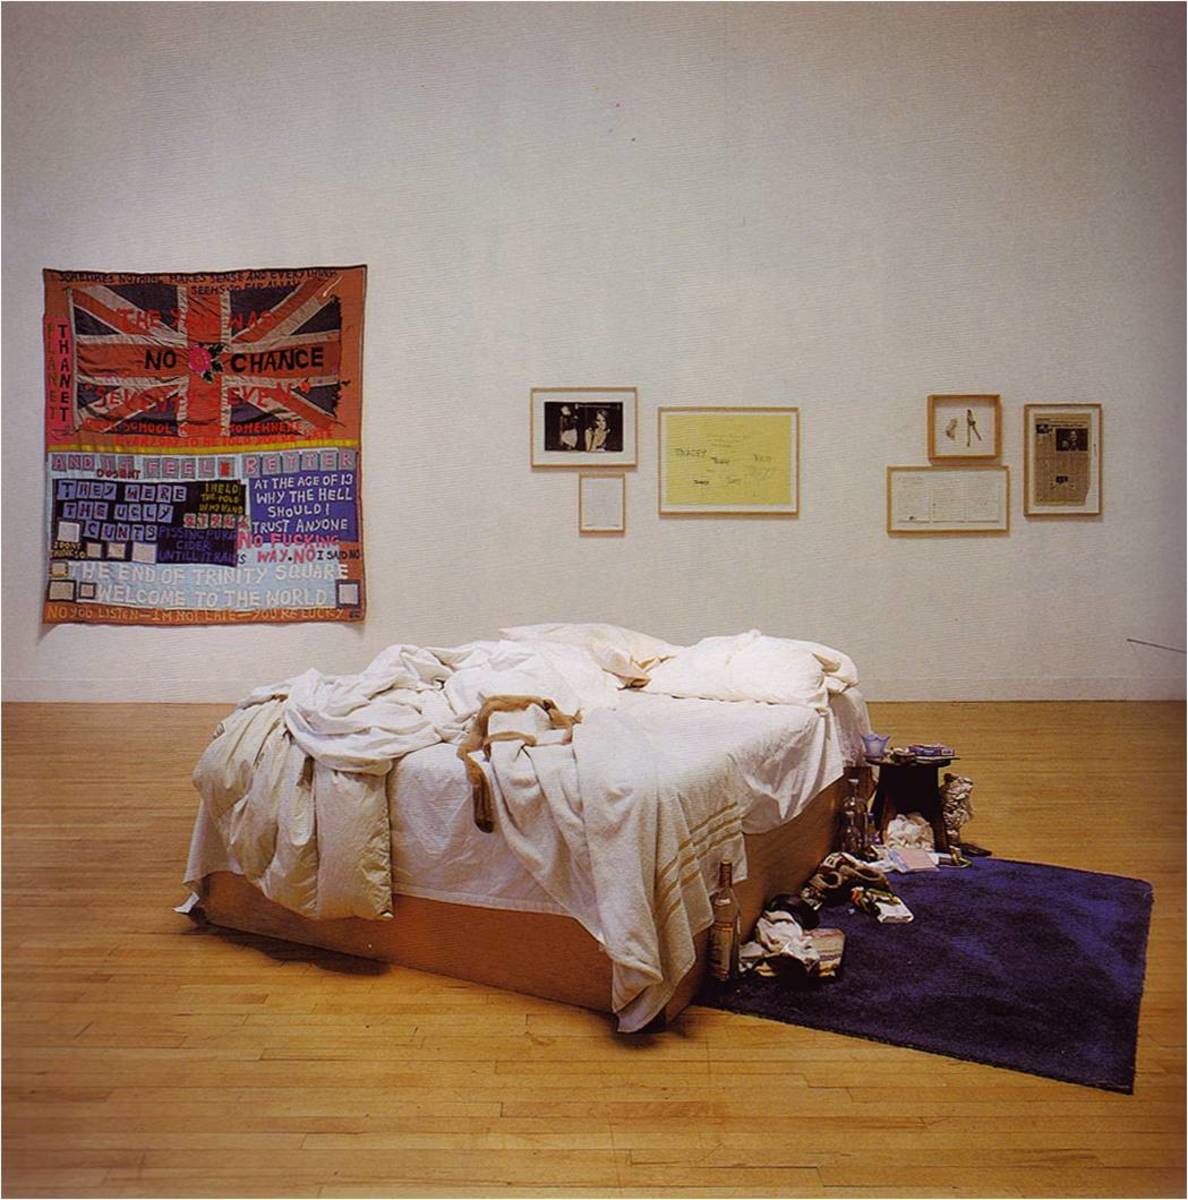 Tracy Emin, My Bed (1998), 79x211x234cm, mattress, linens, pillows, objects. Saatchi Collection